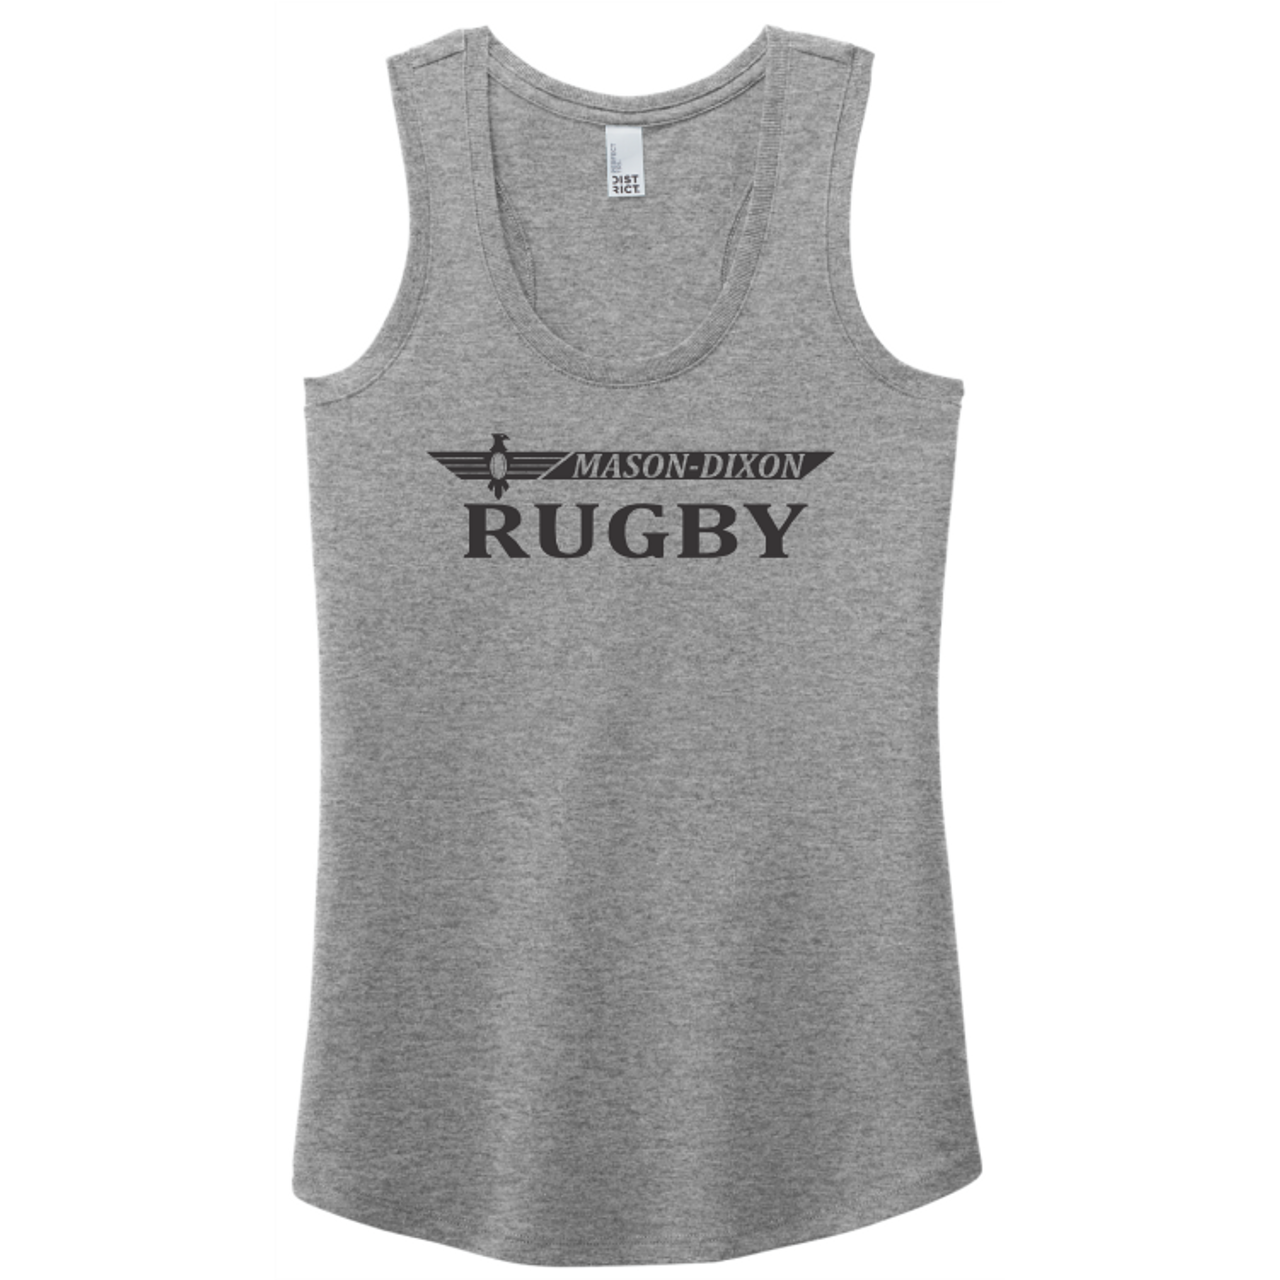 Mason-Dixon Youth Rugby Ladies Tank Top, Gray